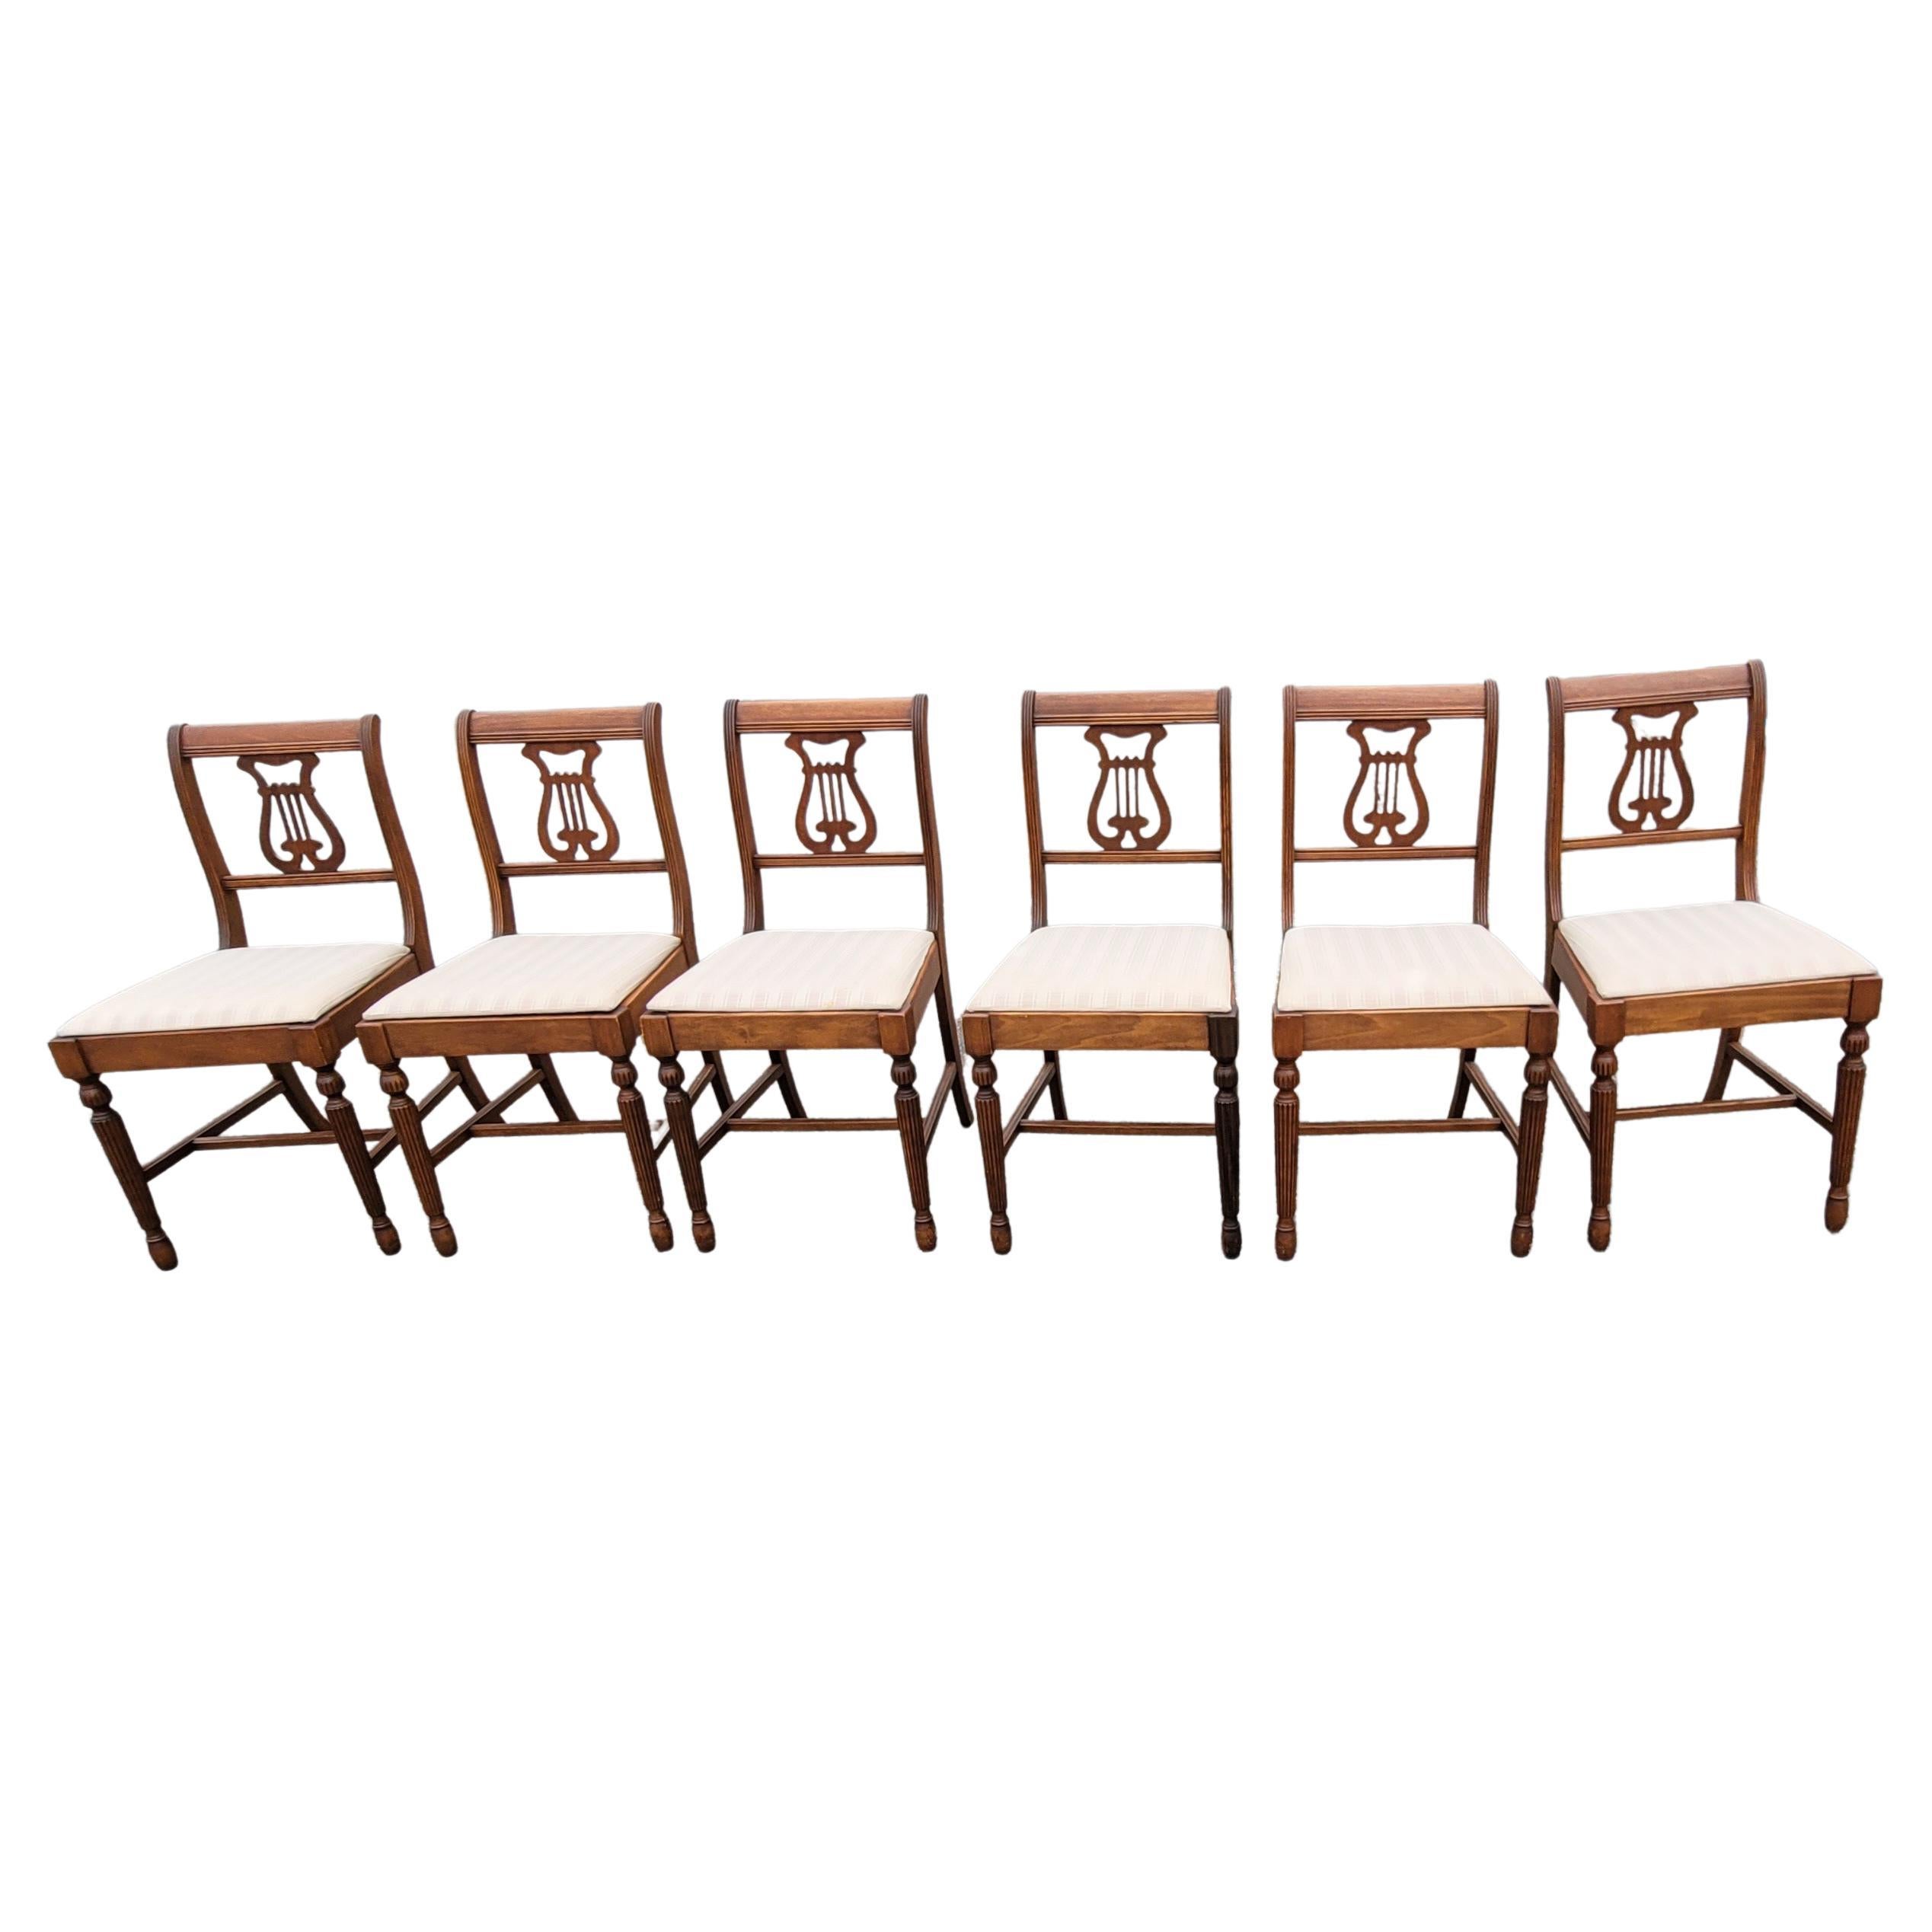 Set of six 1930s refinished Lyre-Back mahogany and upholstered dining chairs. Newer upholstery. Beautiful hand rub finish appearance. Measure 17